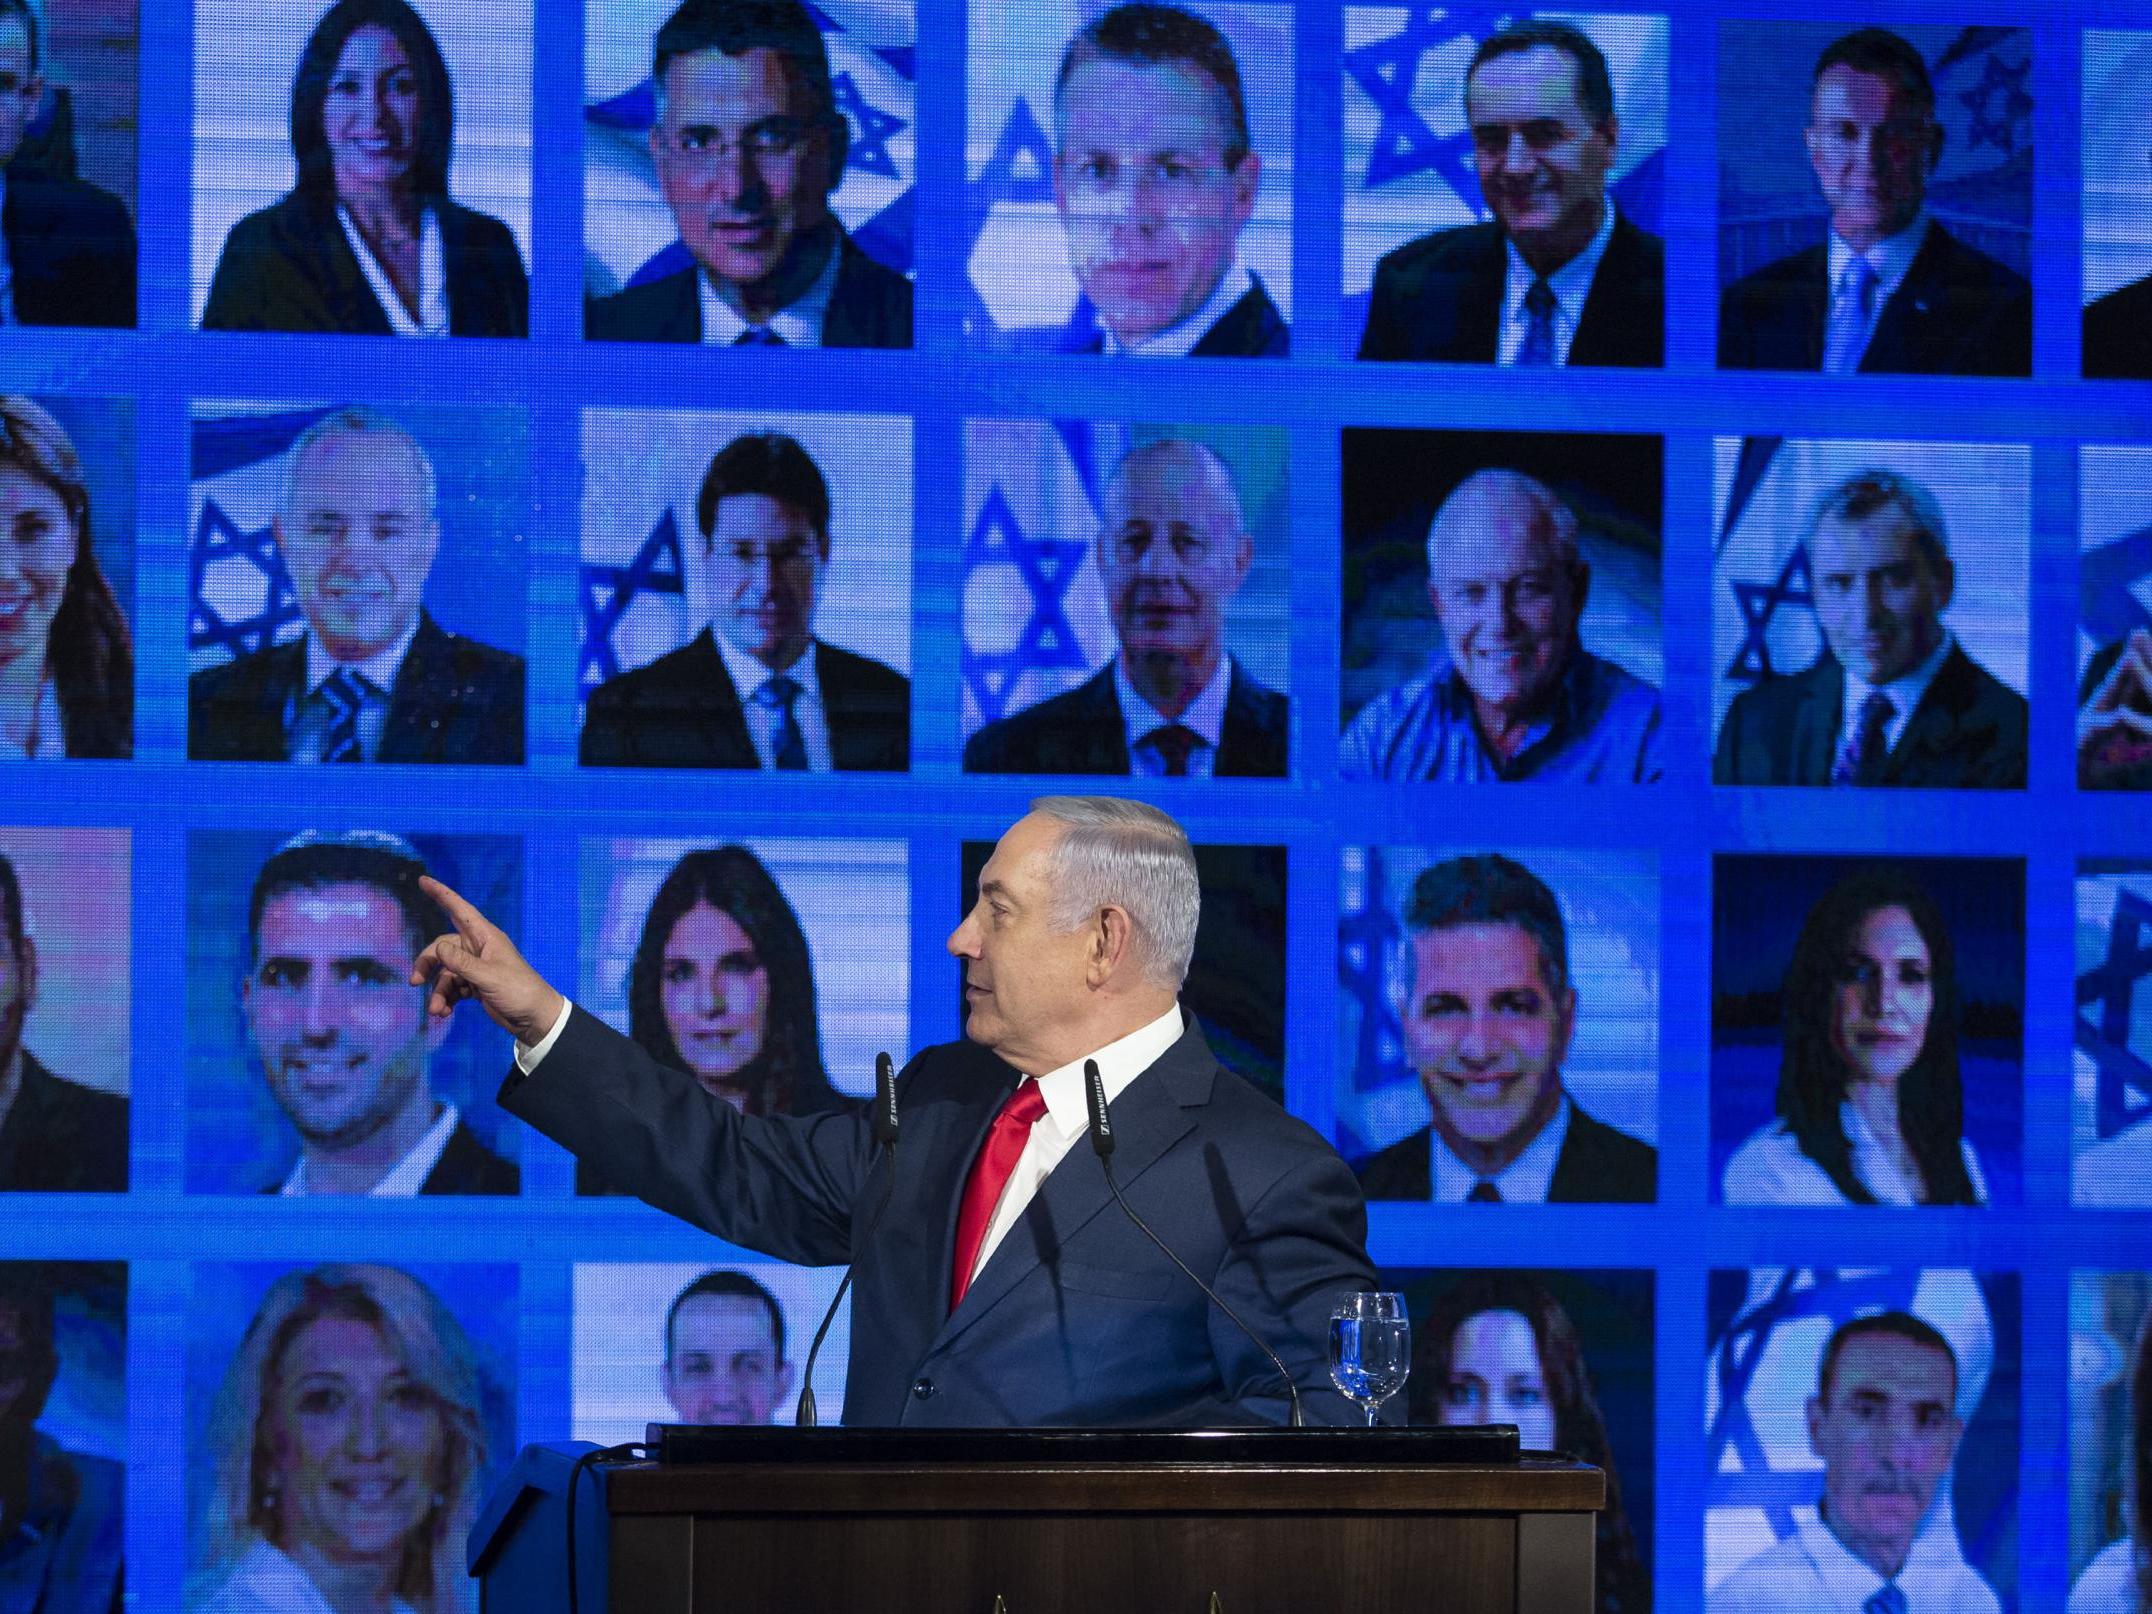 Benjamin Netanyahu points to photos of Likud party members as he delivers a speech during the launch of his party's election campaign on March 4, 2019